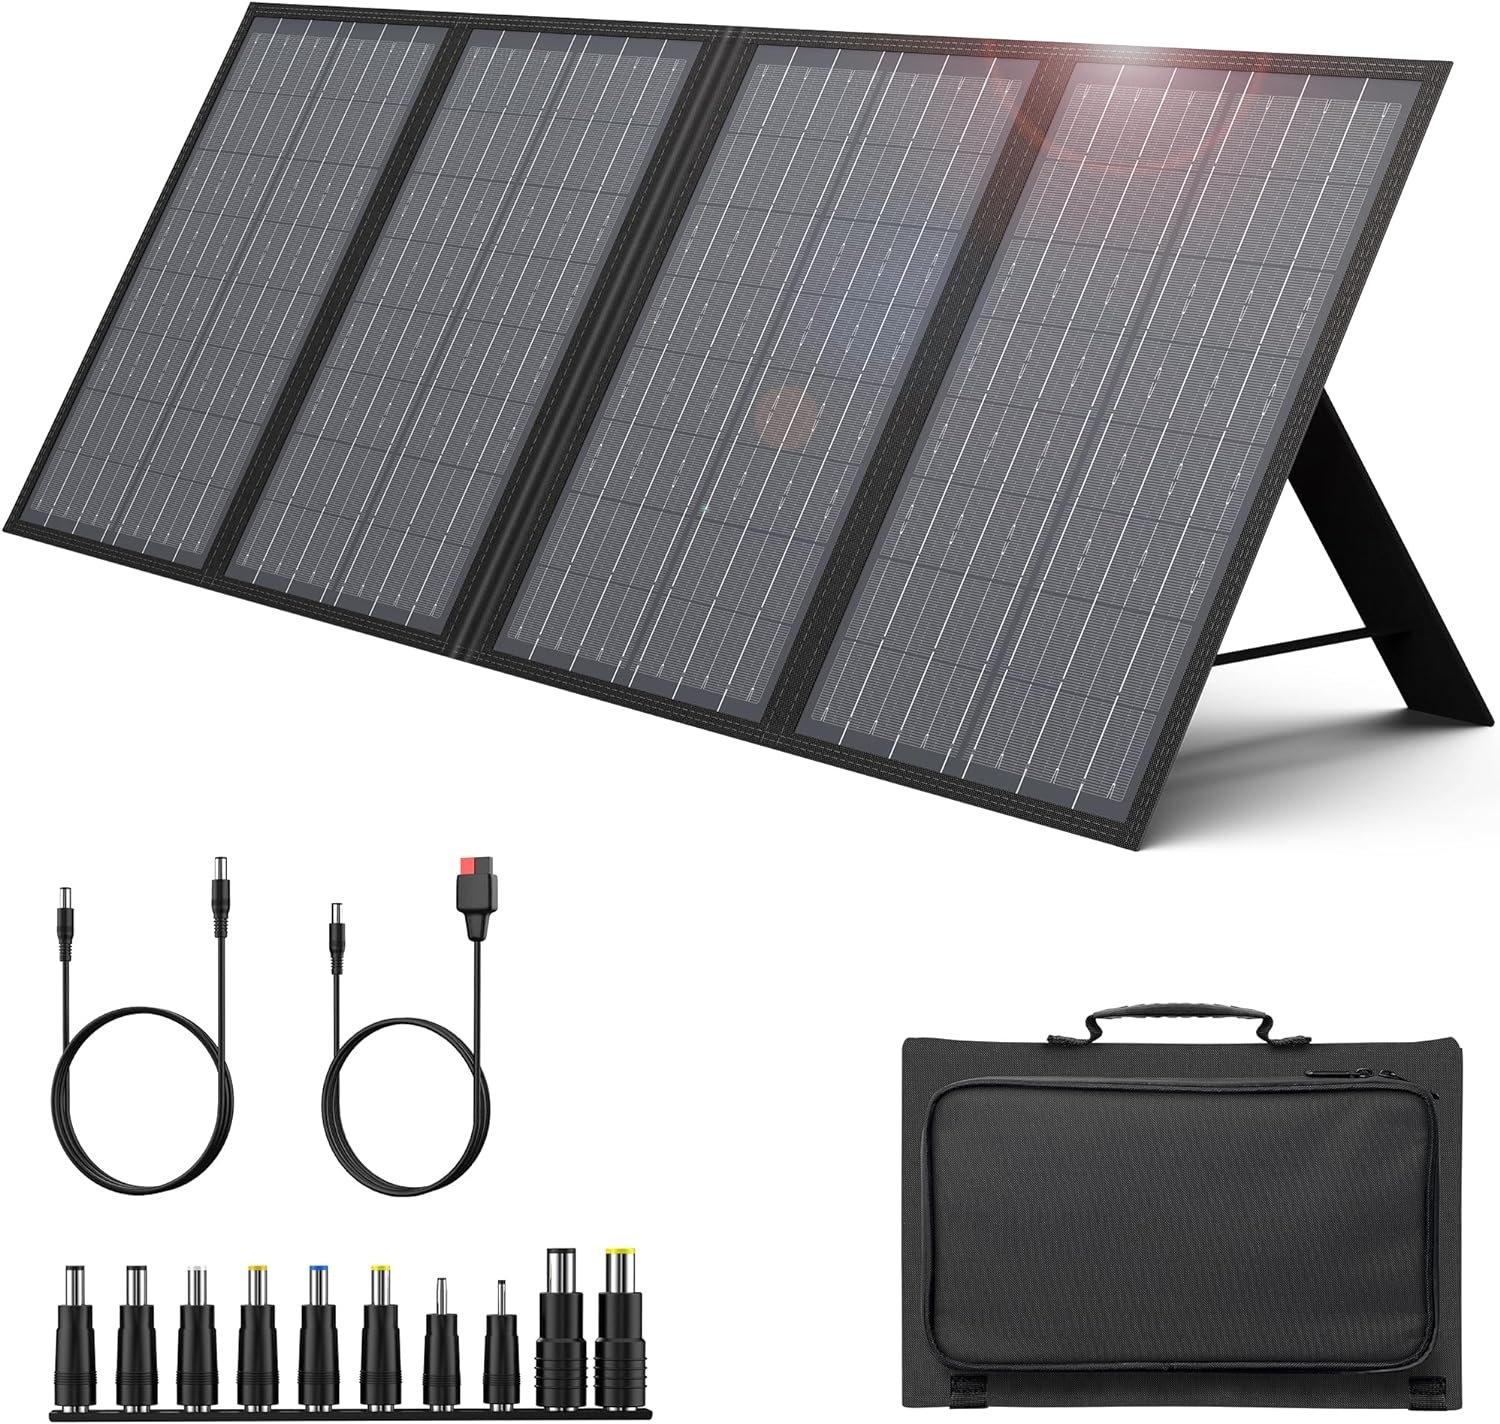 ENGINSTAR 60W Foldable Solar Panel Charger Review